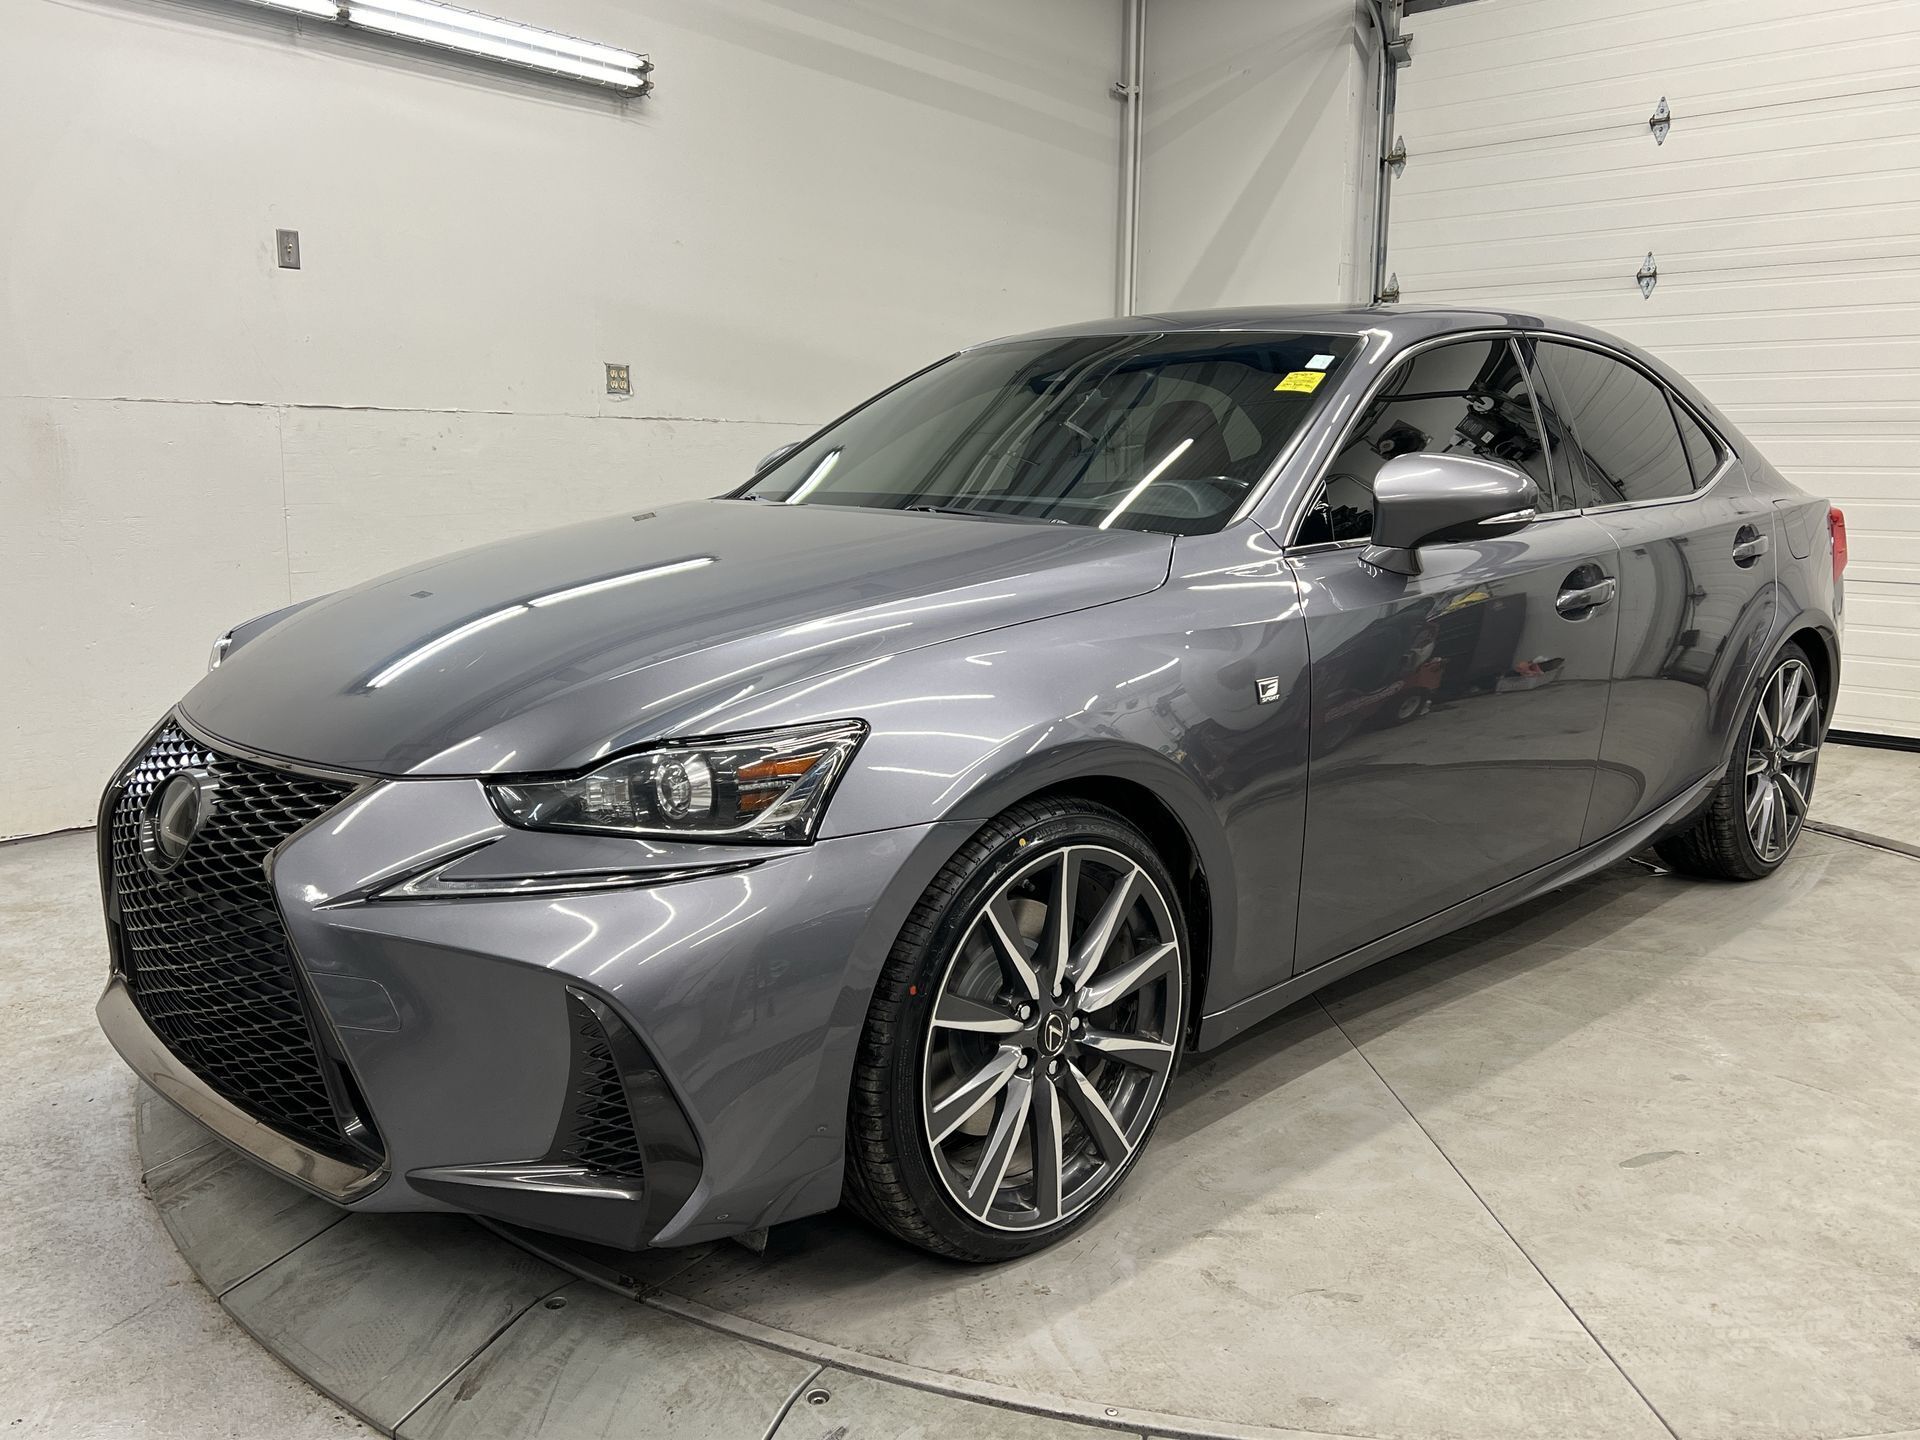 2018 Lexus IS 300 F SPORT AWD | 3.5L V6 | SUNROOF | RED LEATHER